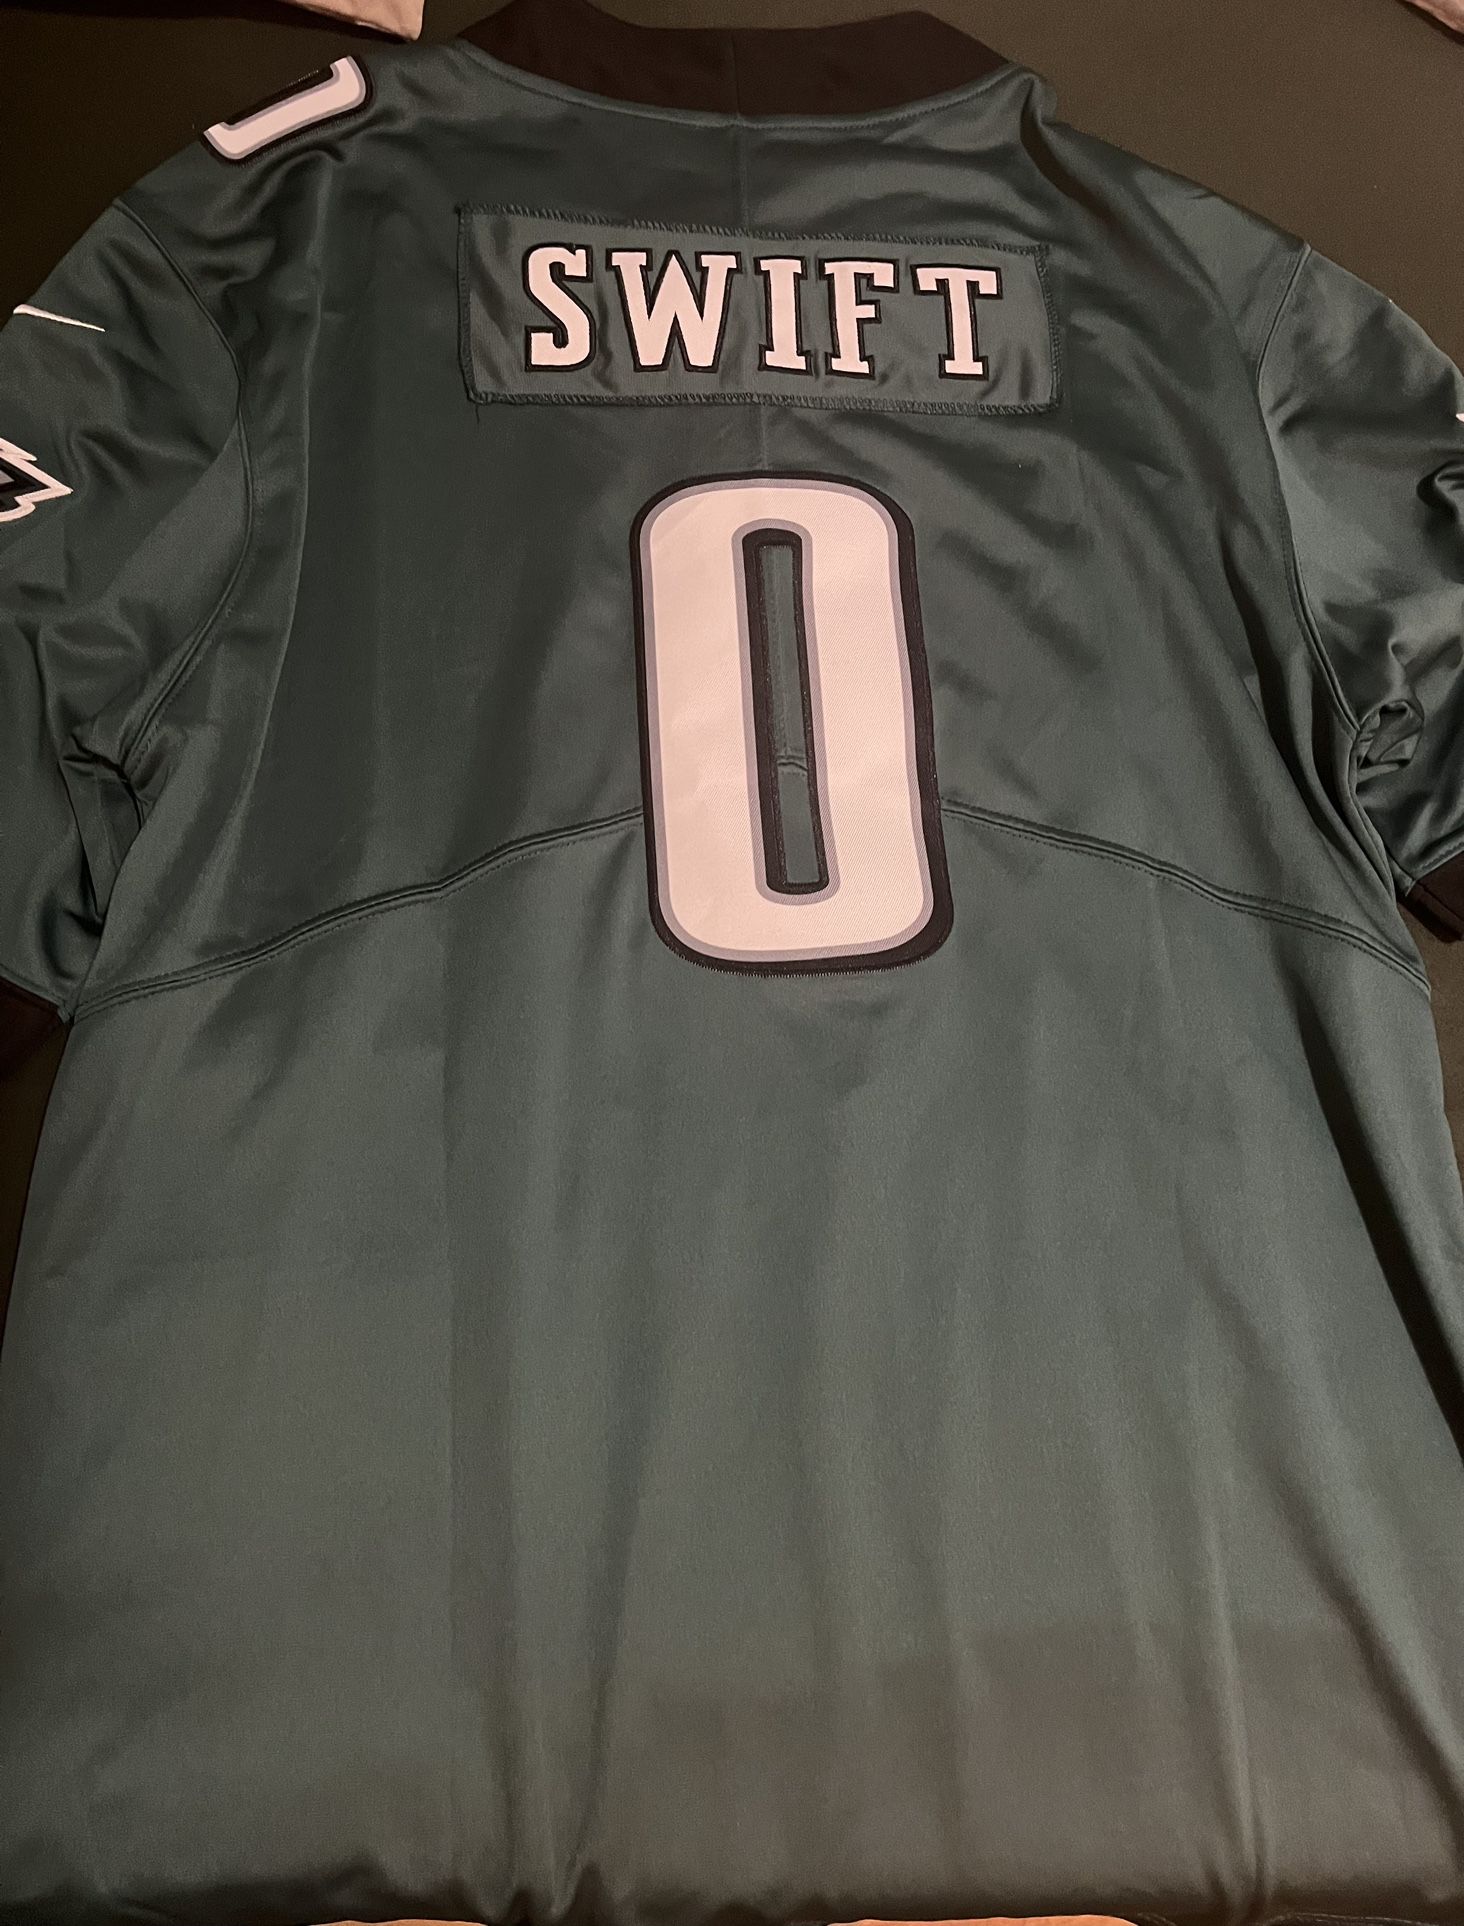 Swift Eagles Jersey Size XL - Authentic NFL